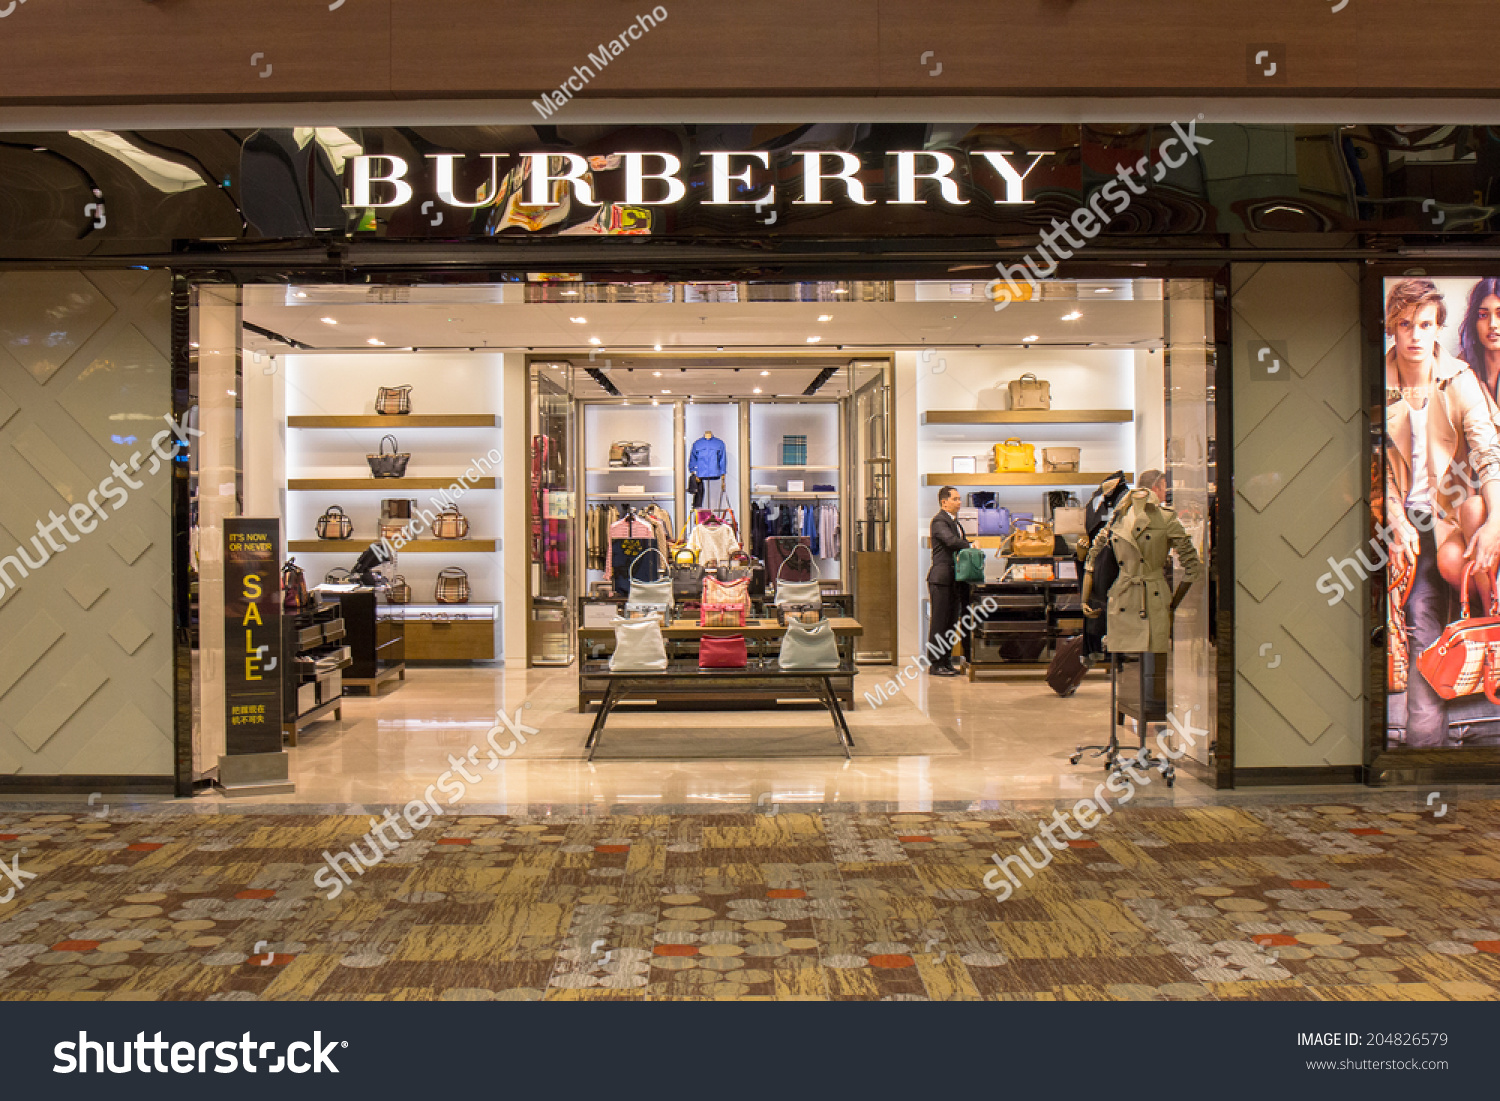 Burberry Clothing Store Best Sale, 58% OFF 